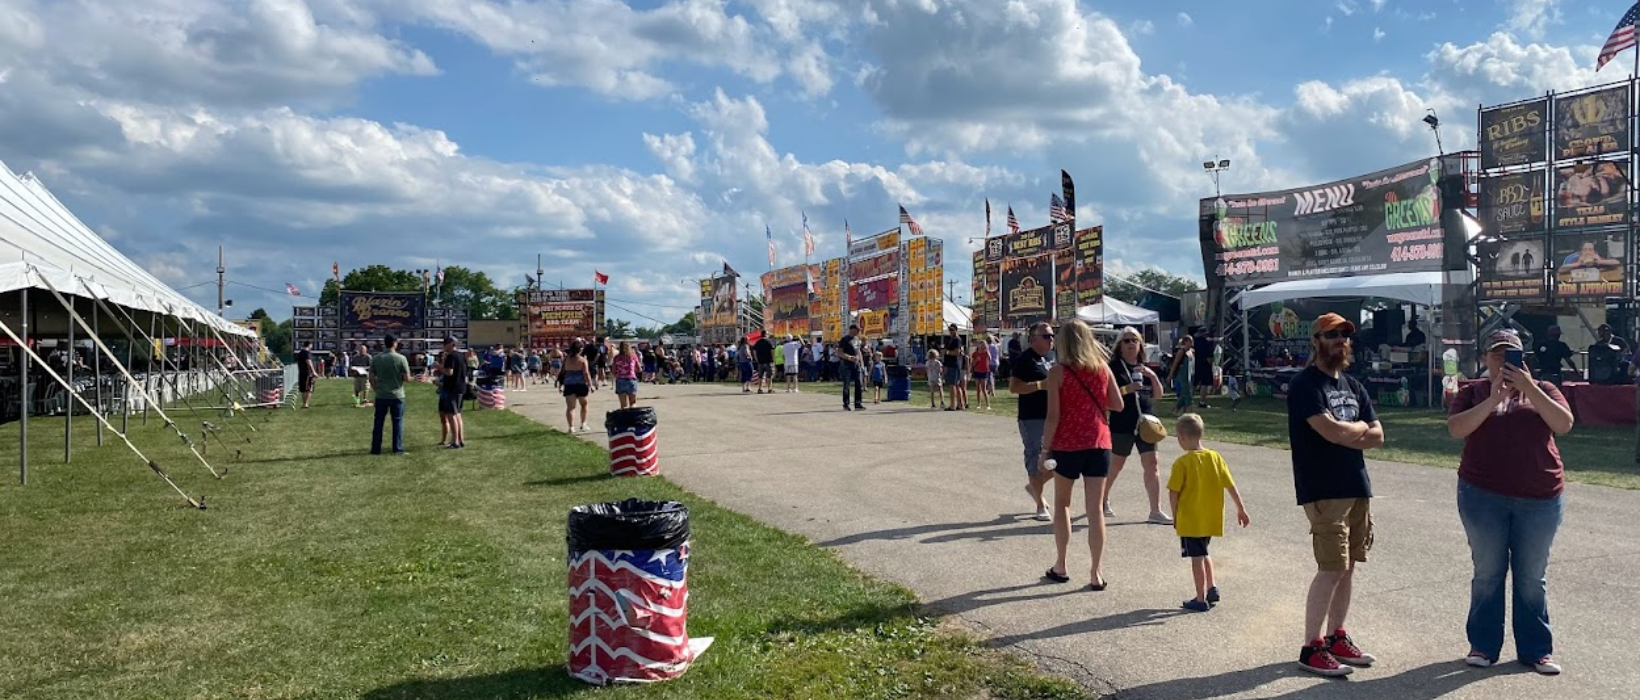 Elkhorn Ribfest Day 1 OUR NEXT FAMILY ADVENTURE